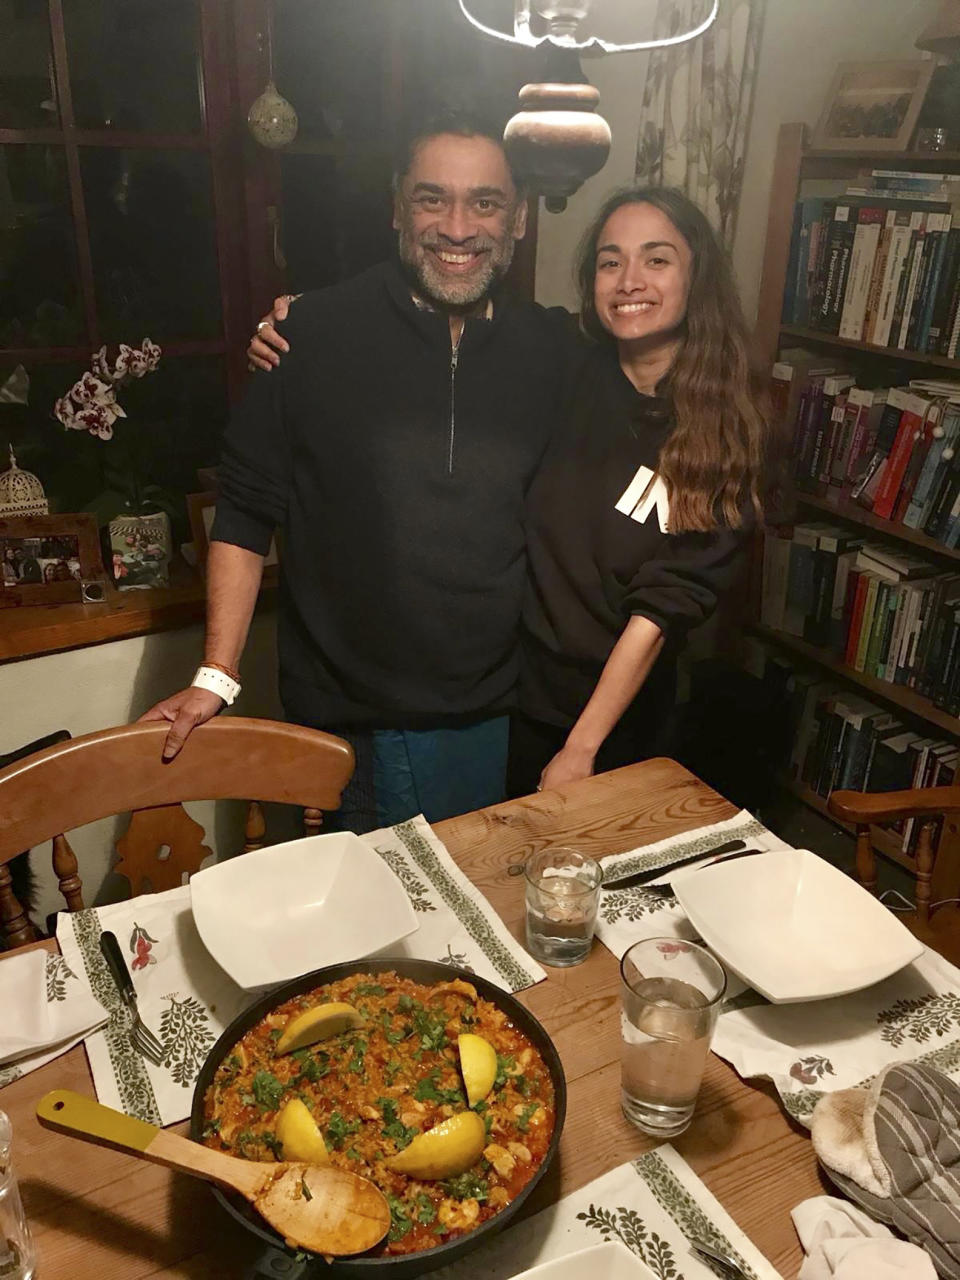 In this image taken on April 9, 2020 Dr. Poorna Gunasekera poses for a photo with his daughter Saki with the 'Paella' dish prepared as his welcome home dinner in the village of Filham, Devon, England after returning from hospital. At his darkest moment in his struggle with the coronavirus, Dr. Poorna Gunasekera glimpsed the first rays of light when three of his former students came to help. Having endured a severe deterioration in his COVID-19 symptoms after around 12 days of contracting the virus, Gunasekera was rushed to Derriford Hospital in Plymouth, in the early hours of March 30. "It was wonderful that during that time, two of my former students, who are doctors, and another who was a nurse, actually came and they identified themselves," he told The Associated Press over several interviews following his release from hospital on April 9. (George Petrie via AP)